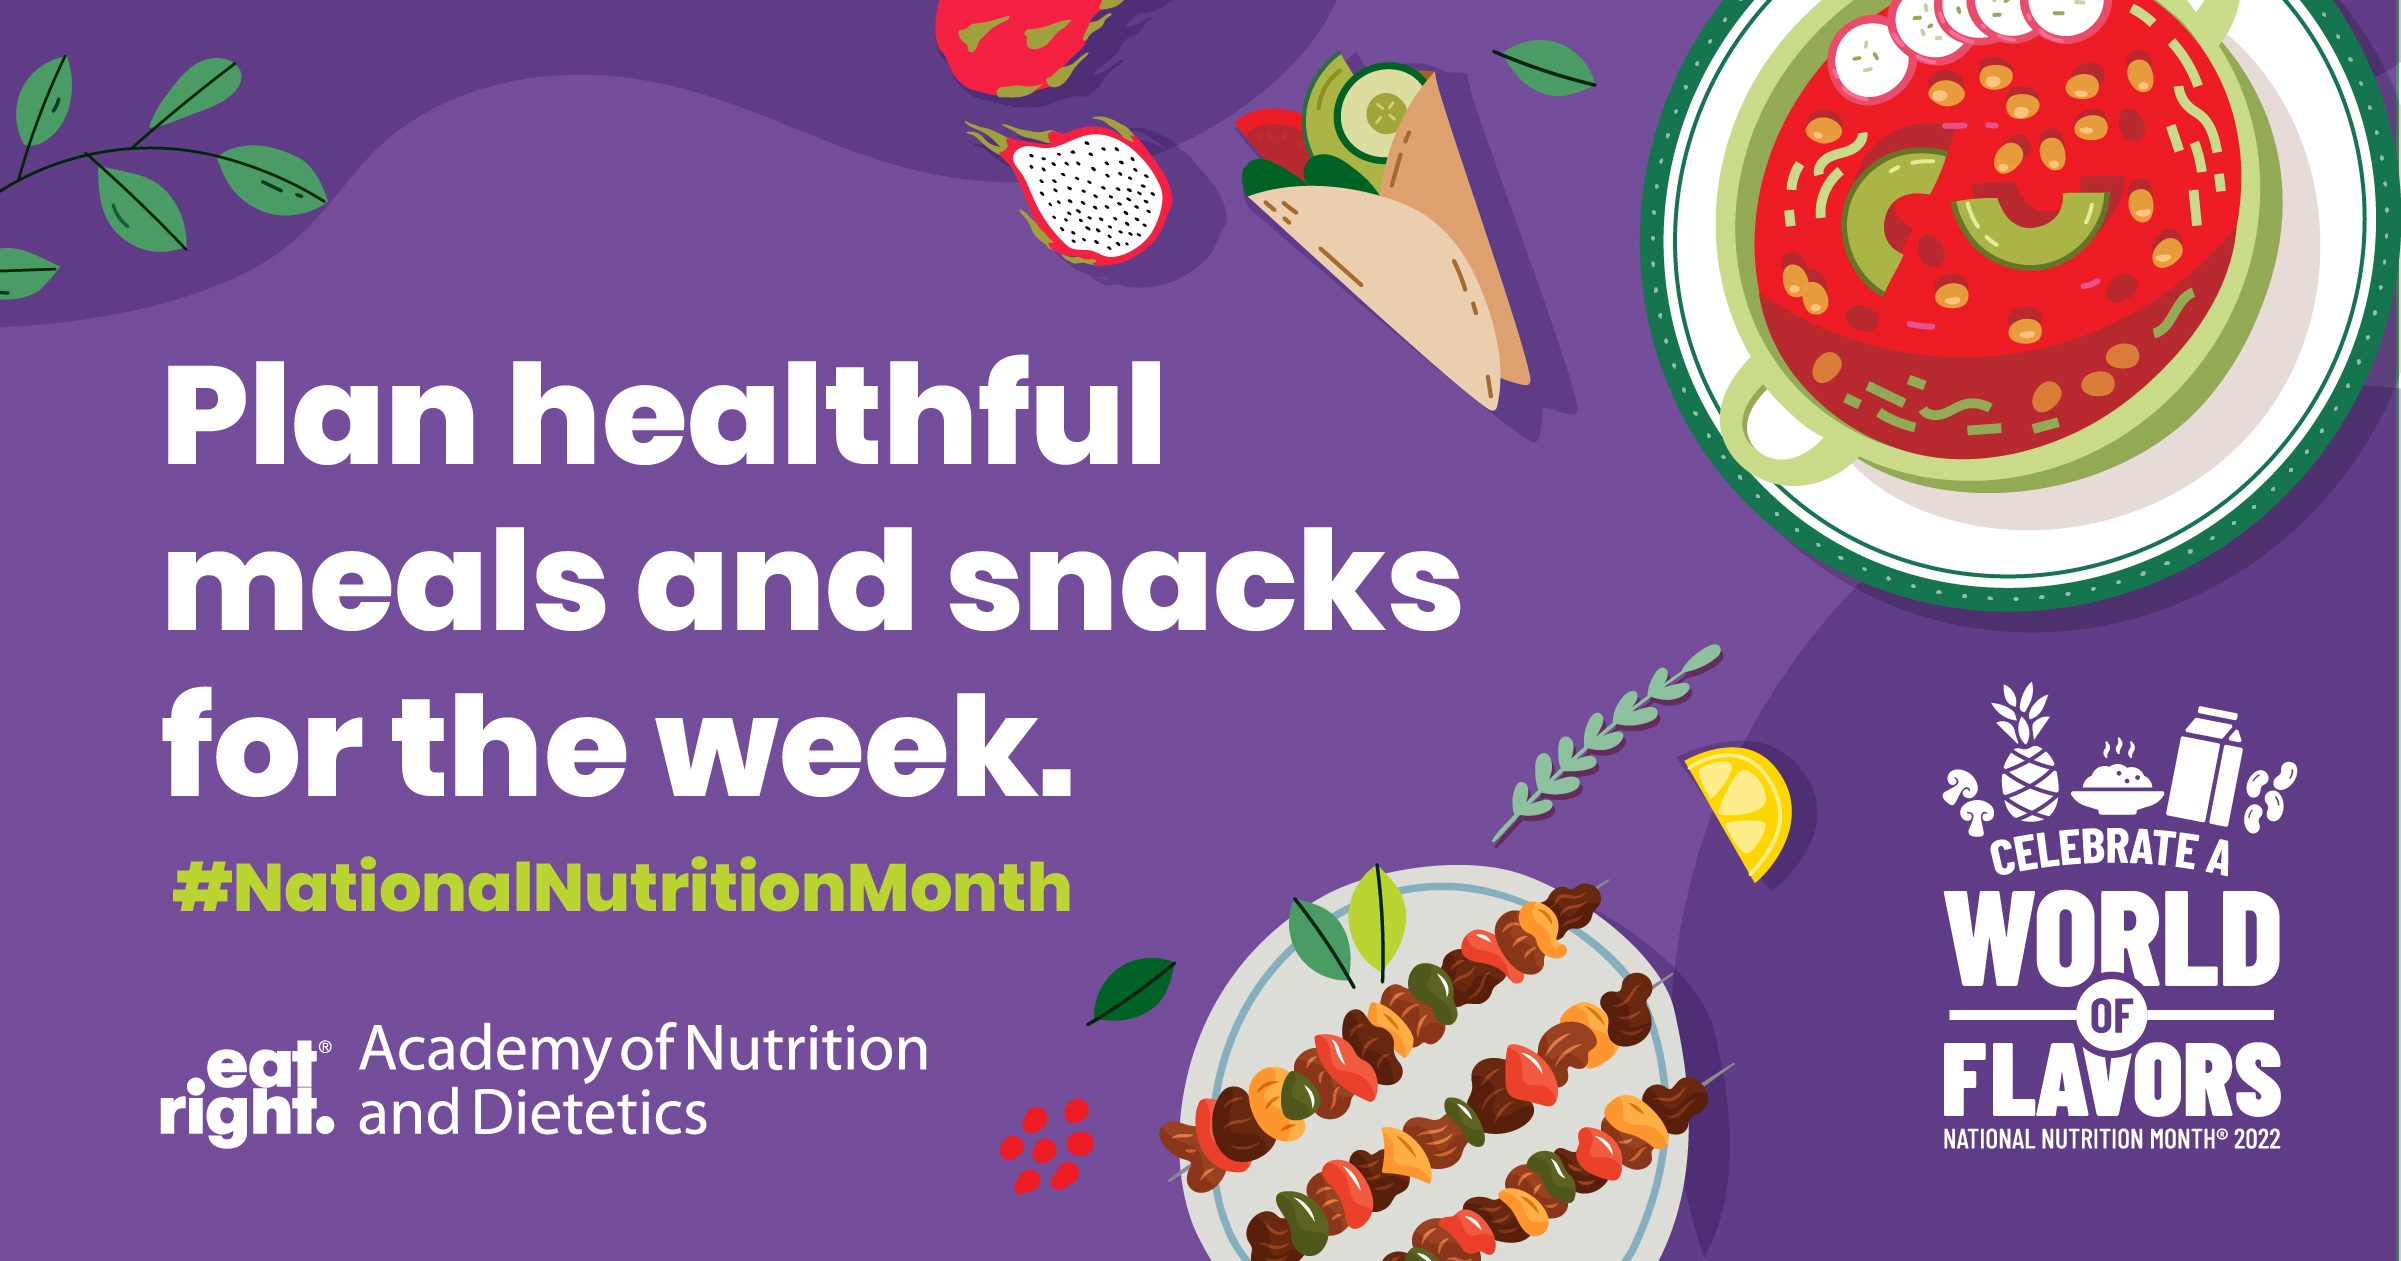 National Nutrition Month Graphic: Plan healthful meals and snacks for the week